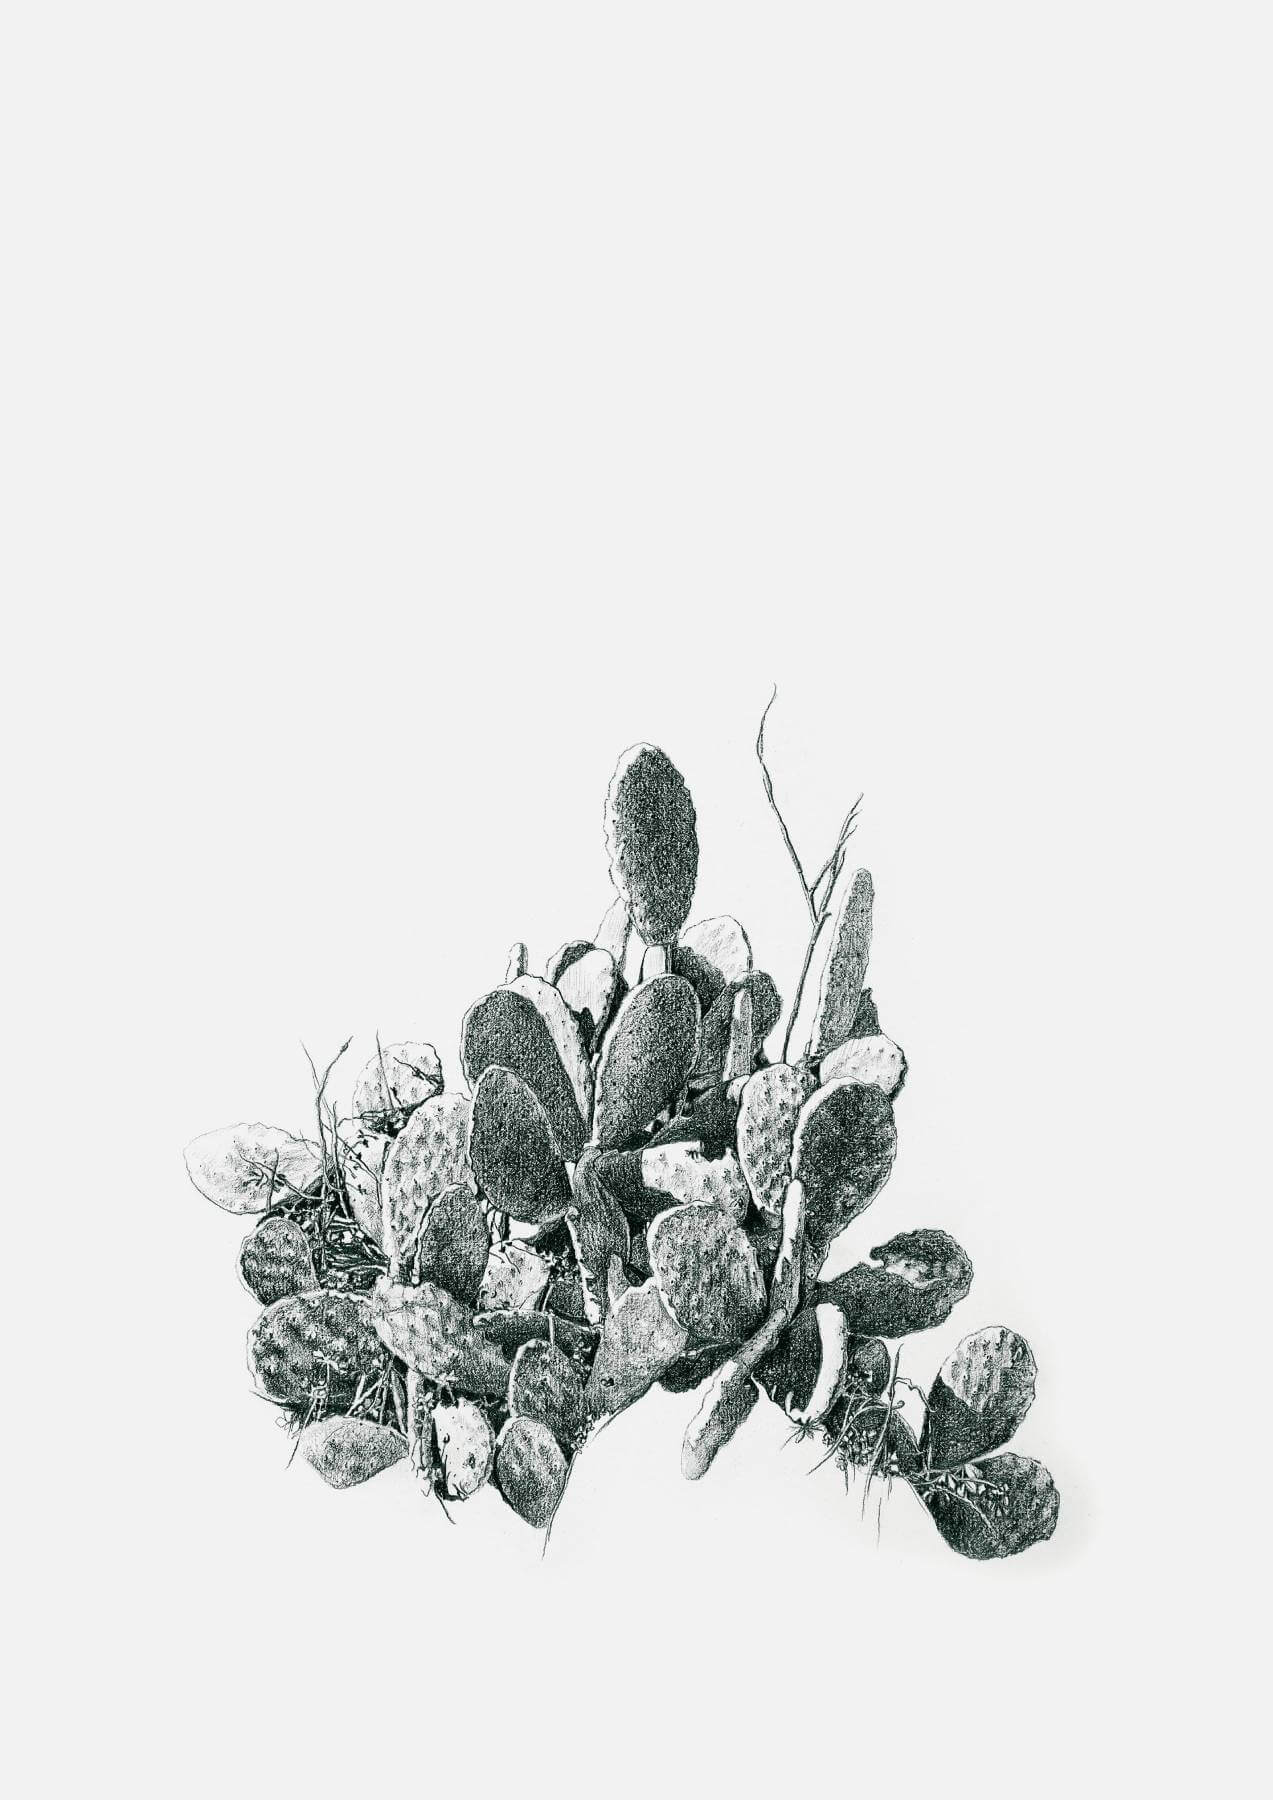 Prickly Pear 2, black & white drawing. Graphite on Arches Paper, by artist Neva Bergemann